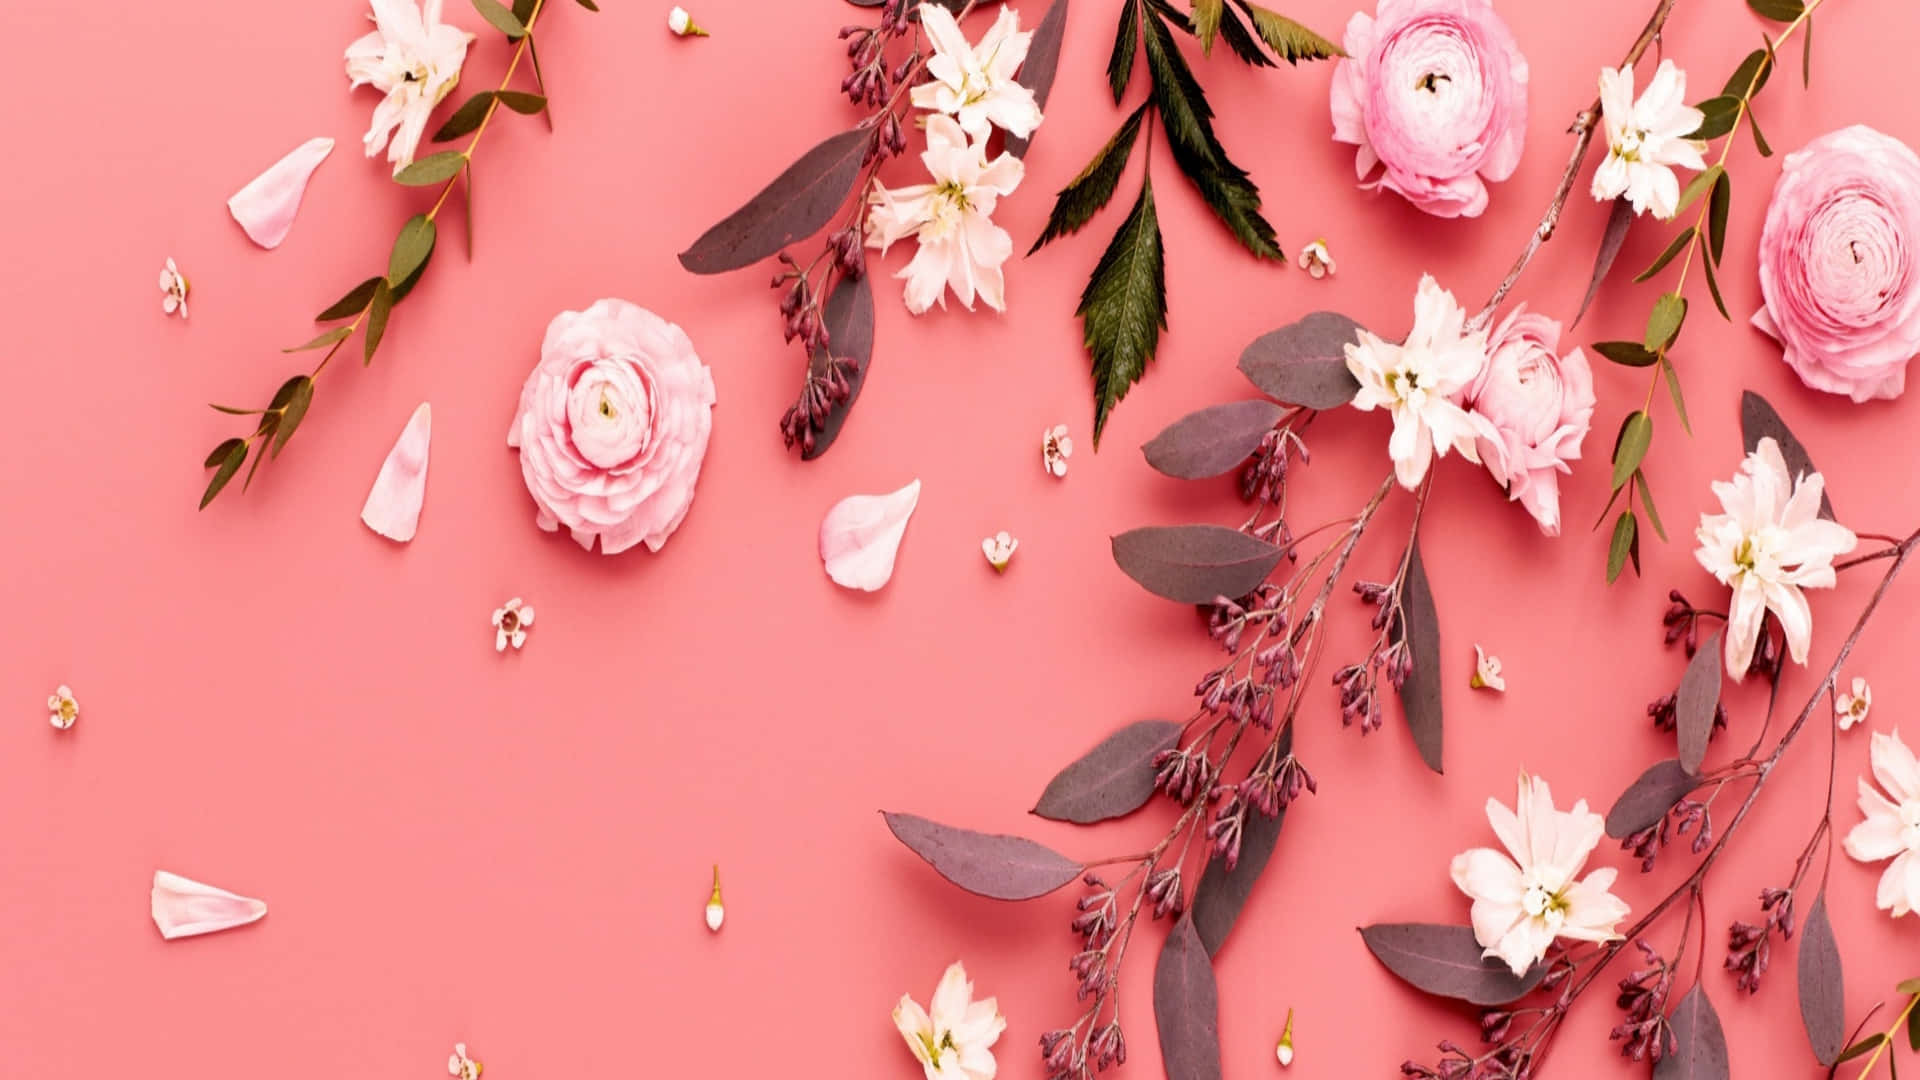 2048x1152 Aesthetic Pastel Pink Flowers And Leaves Wallpaper